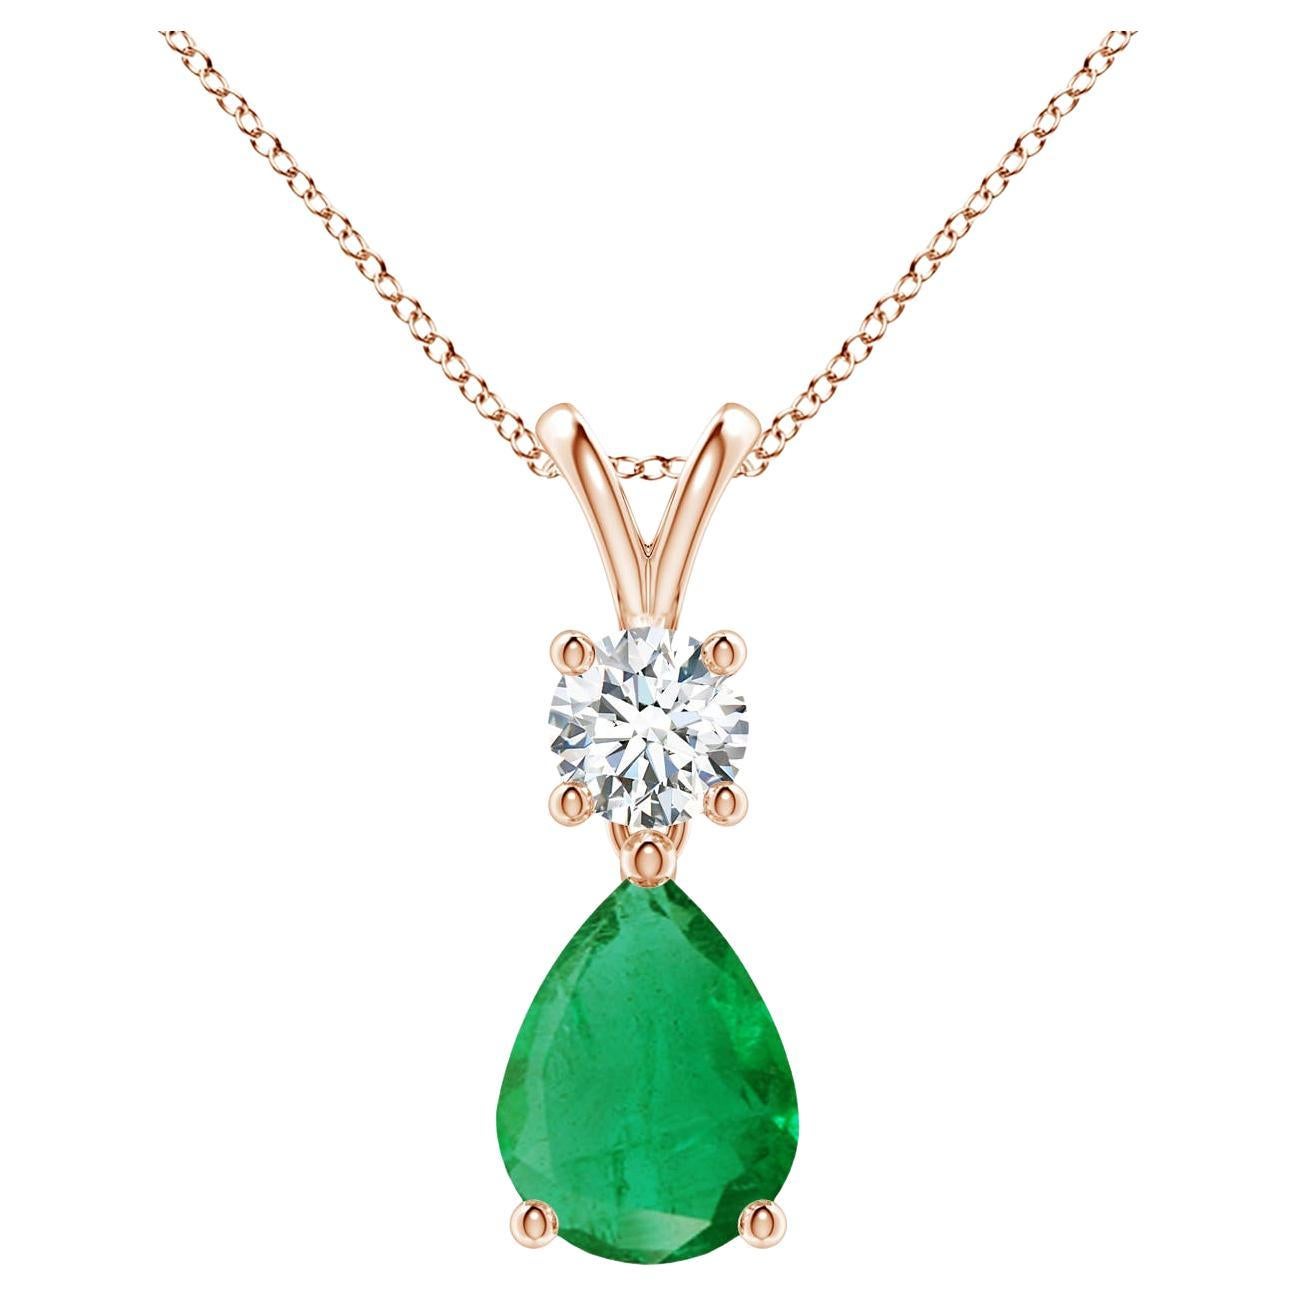 Natural Pear-Shaped Emerald V-Bale Pendant in 14K Rose Gold Size-8x6mm